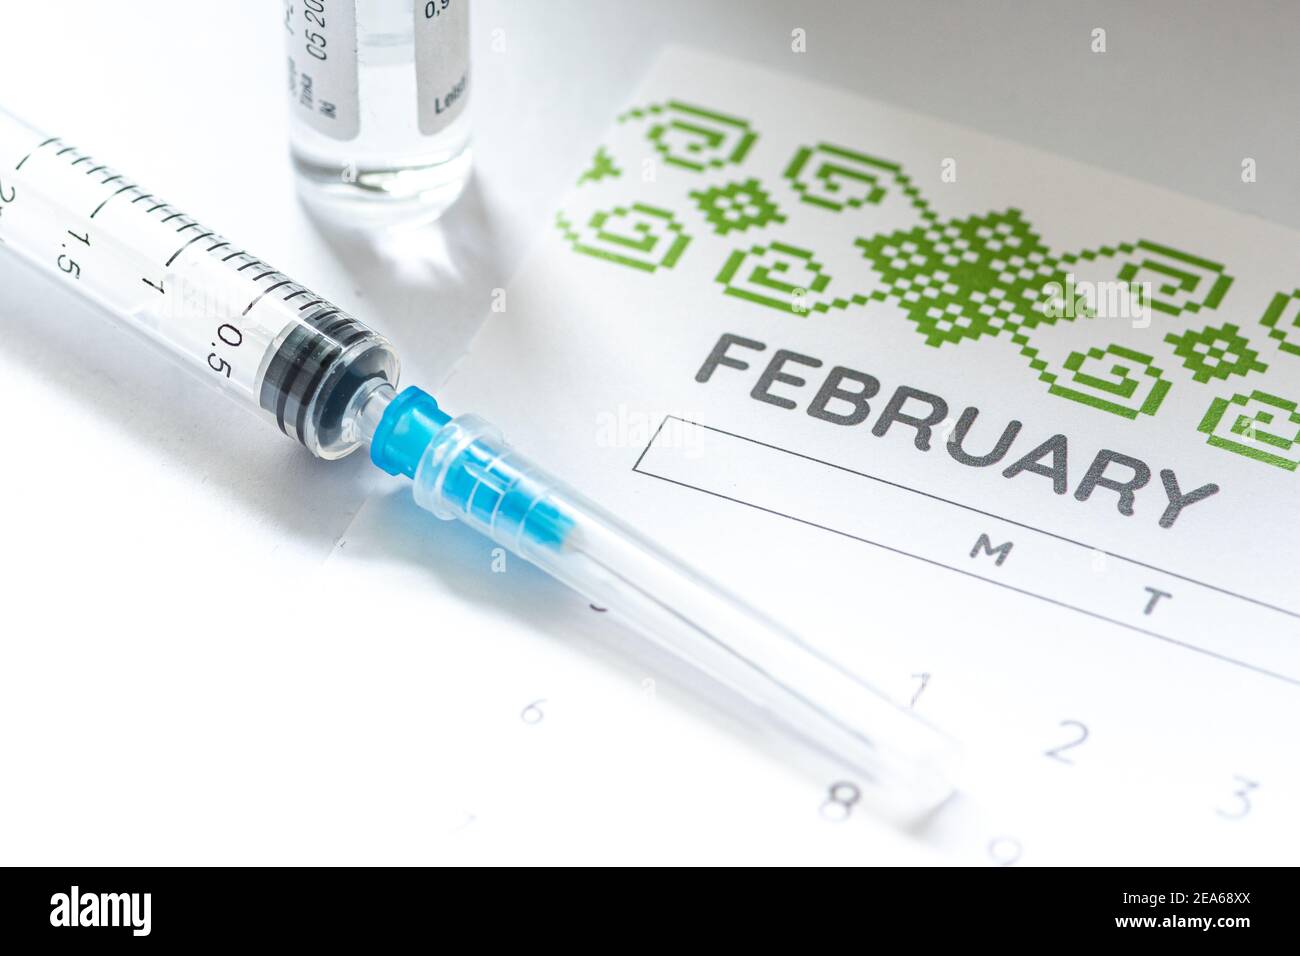 Syringe, glass vial or phial and calendar with month of February on a white table ready to be used. Covid or Coronavirus vaccine background, close up Stock Photo